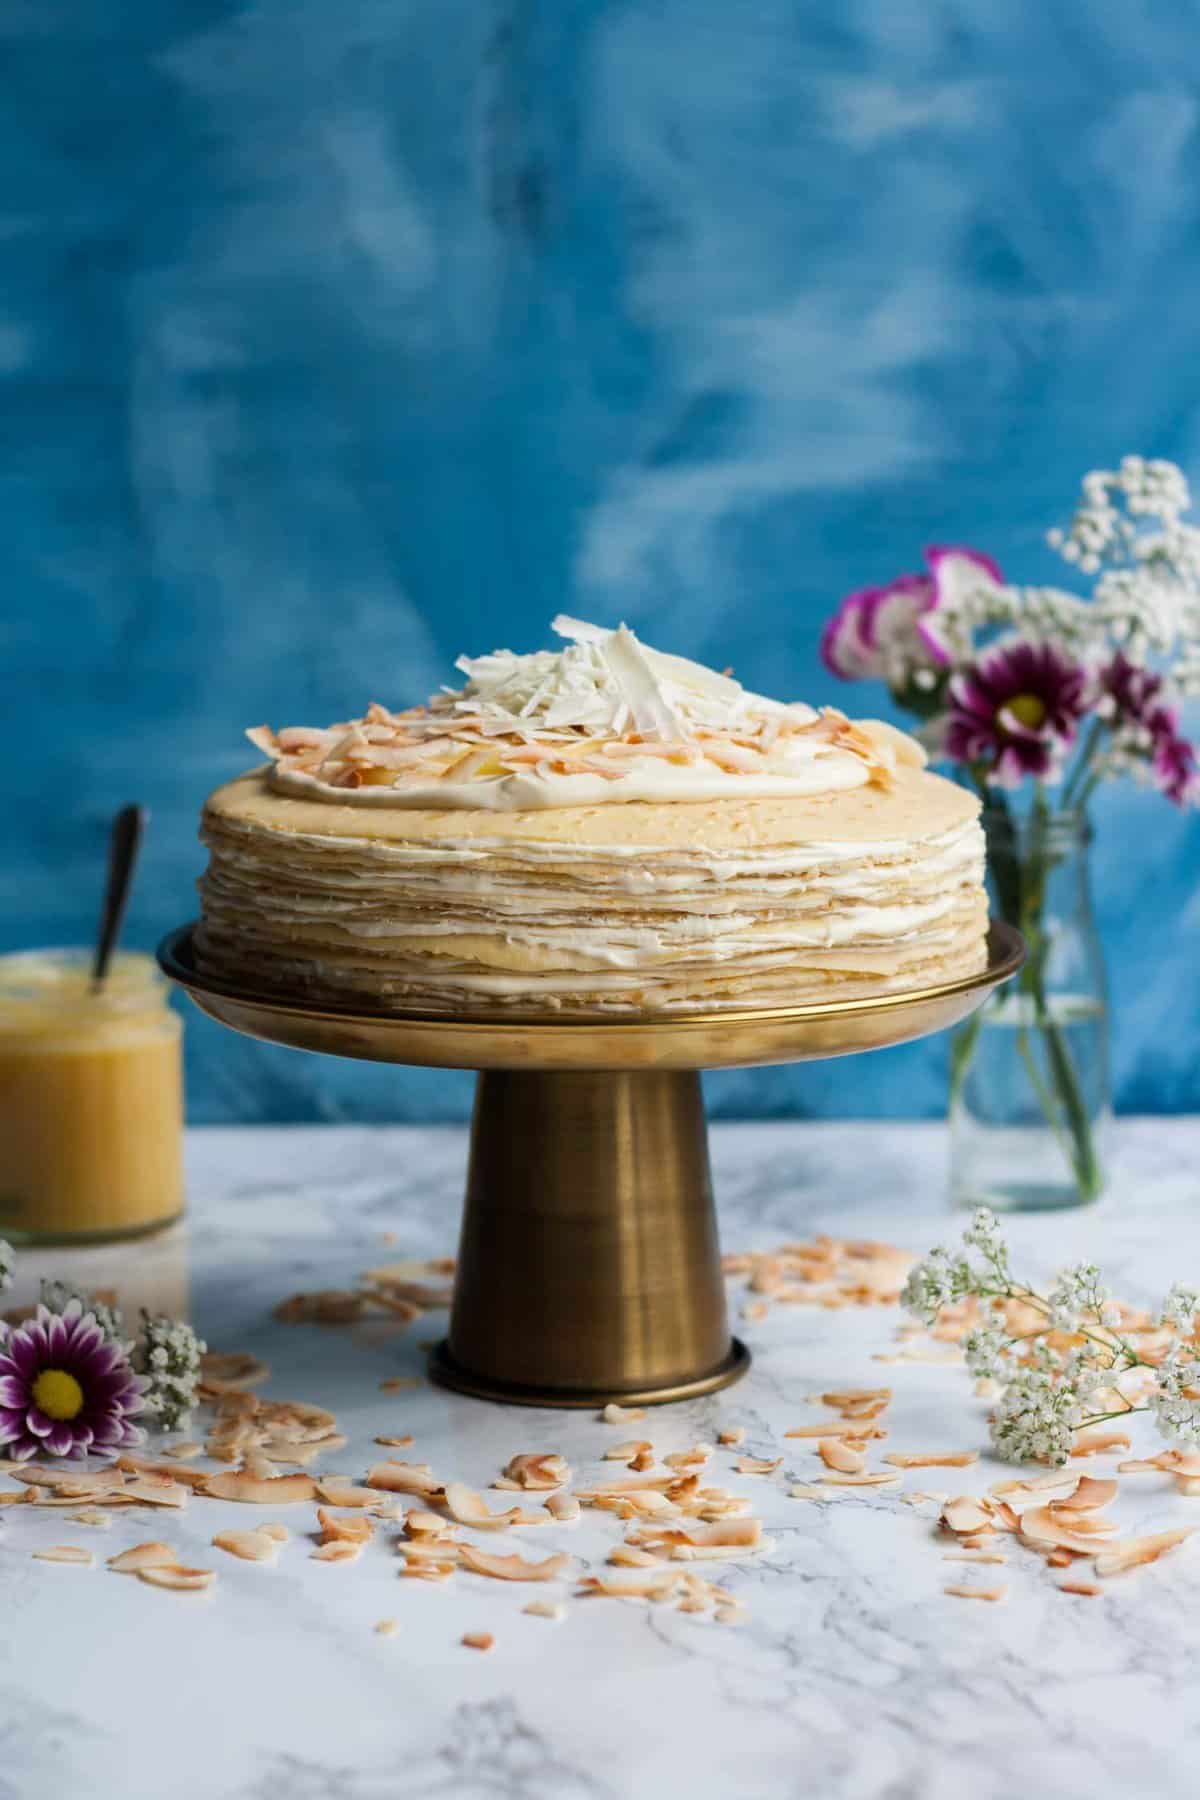 A crepe cake on a cake stand with a jar of lemon curd in the background.